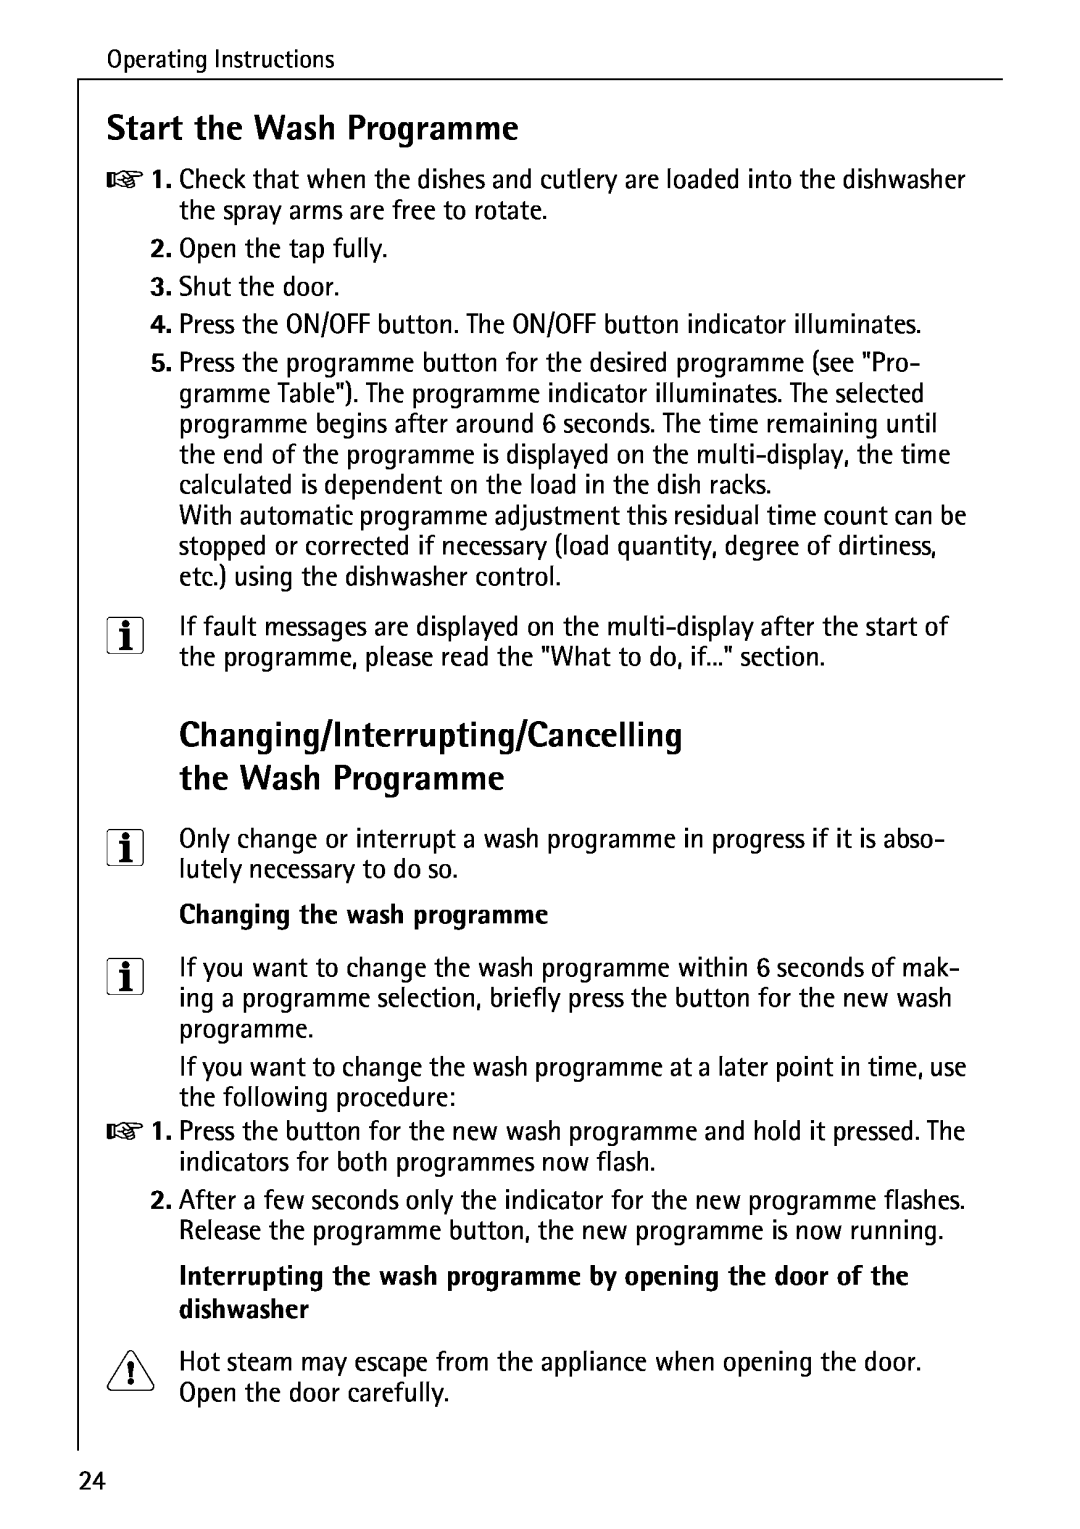 AEG 3A manual Start the Wash Programme, Changing/Interrupting/Cancelling, Changing the wash programme 